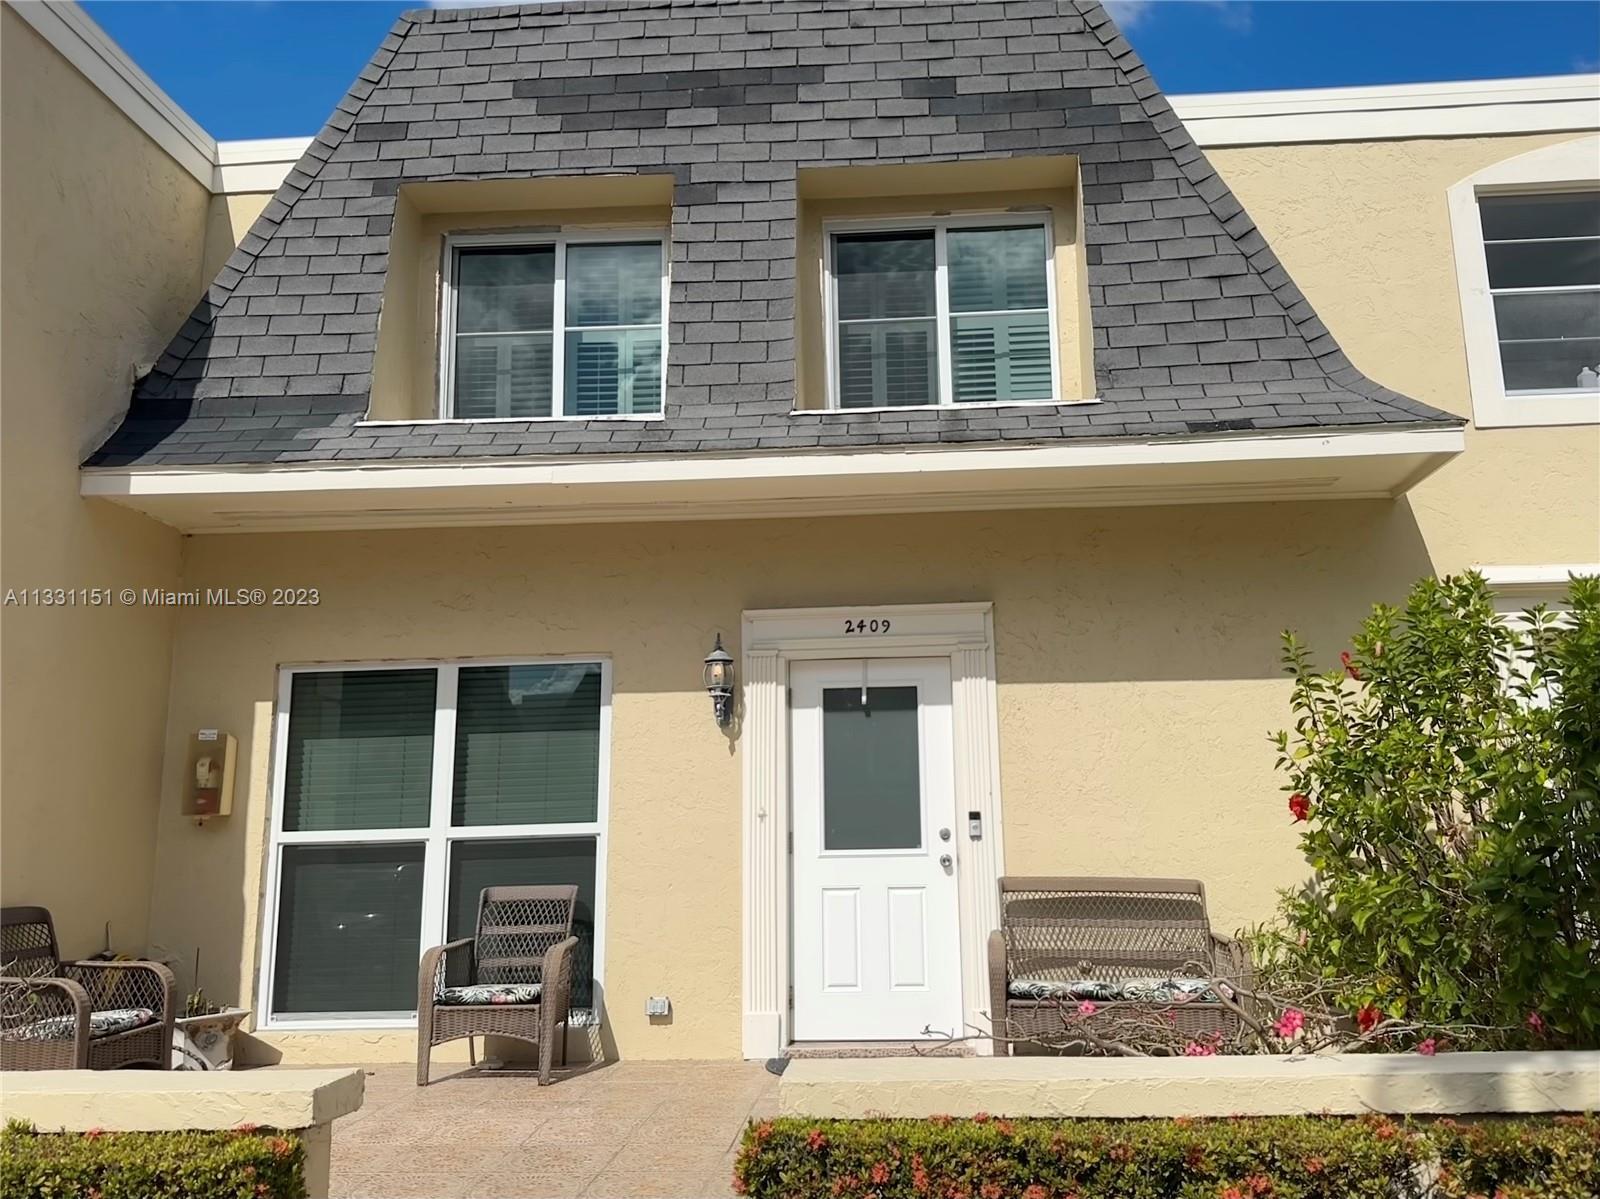 Spacious 3 bed/2.5 bath townhome located on a quiet street in Venetian Park. With over 1800 sq ft  t